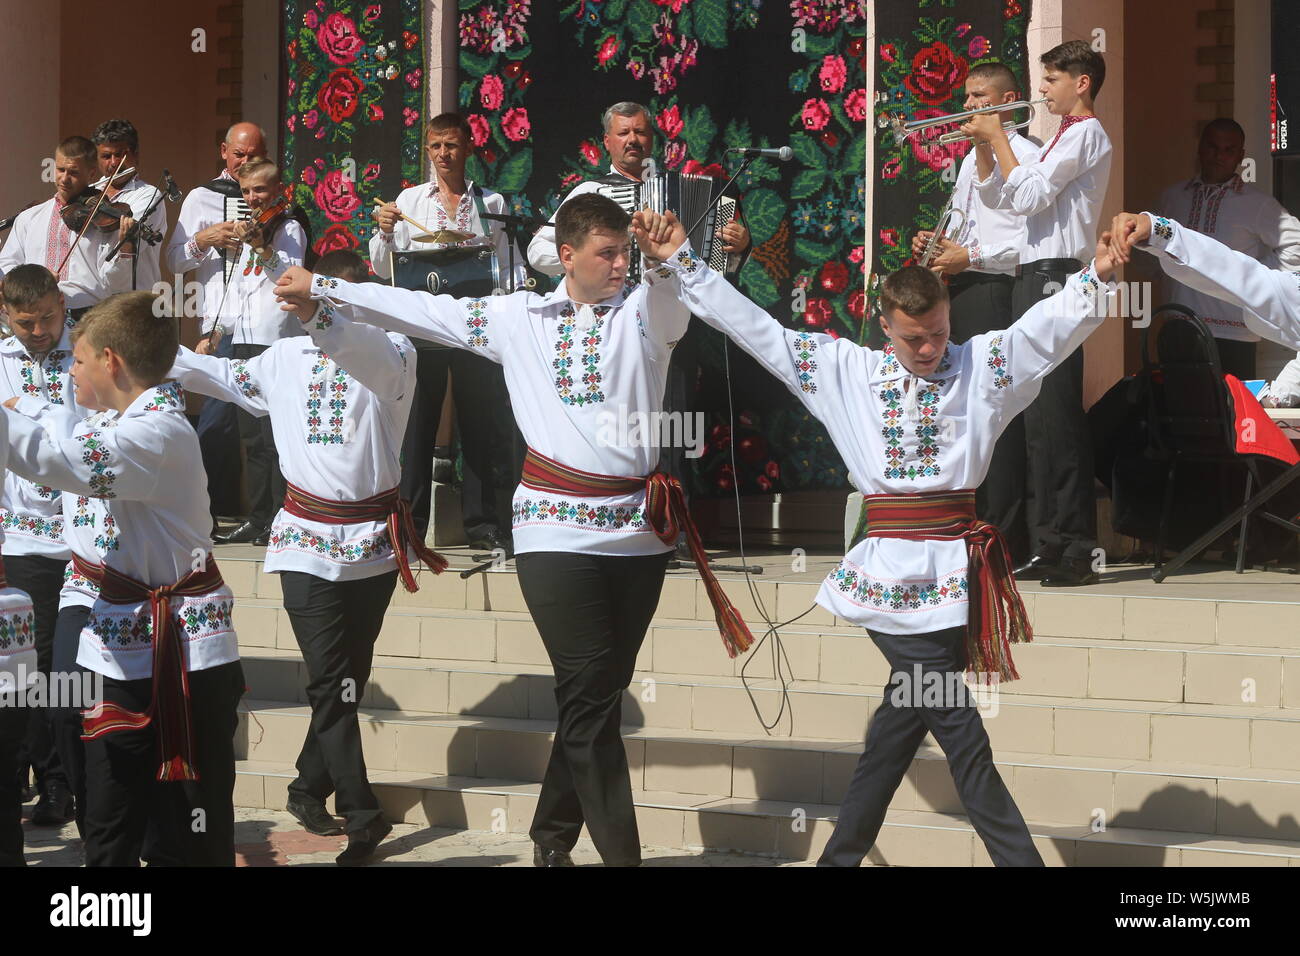 Performing folk dances in the Moldavian national costumes at the folklore festival in the village of Cotala, Moldova. Stock Photo